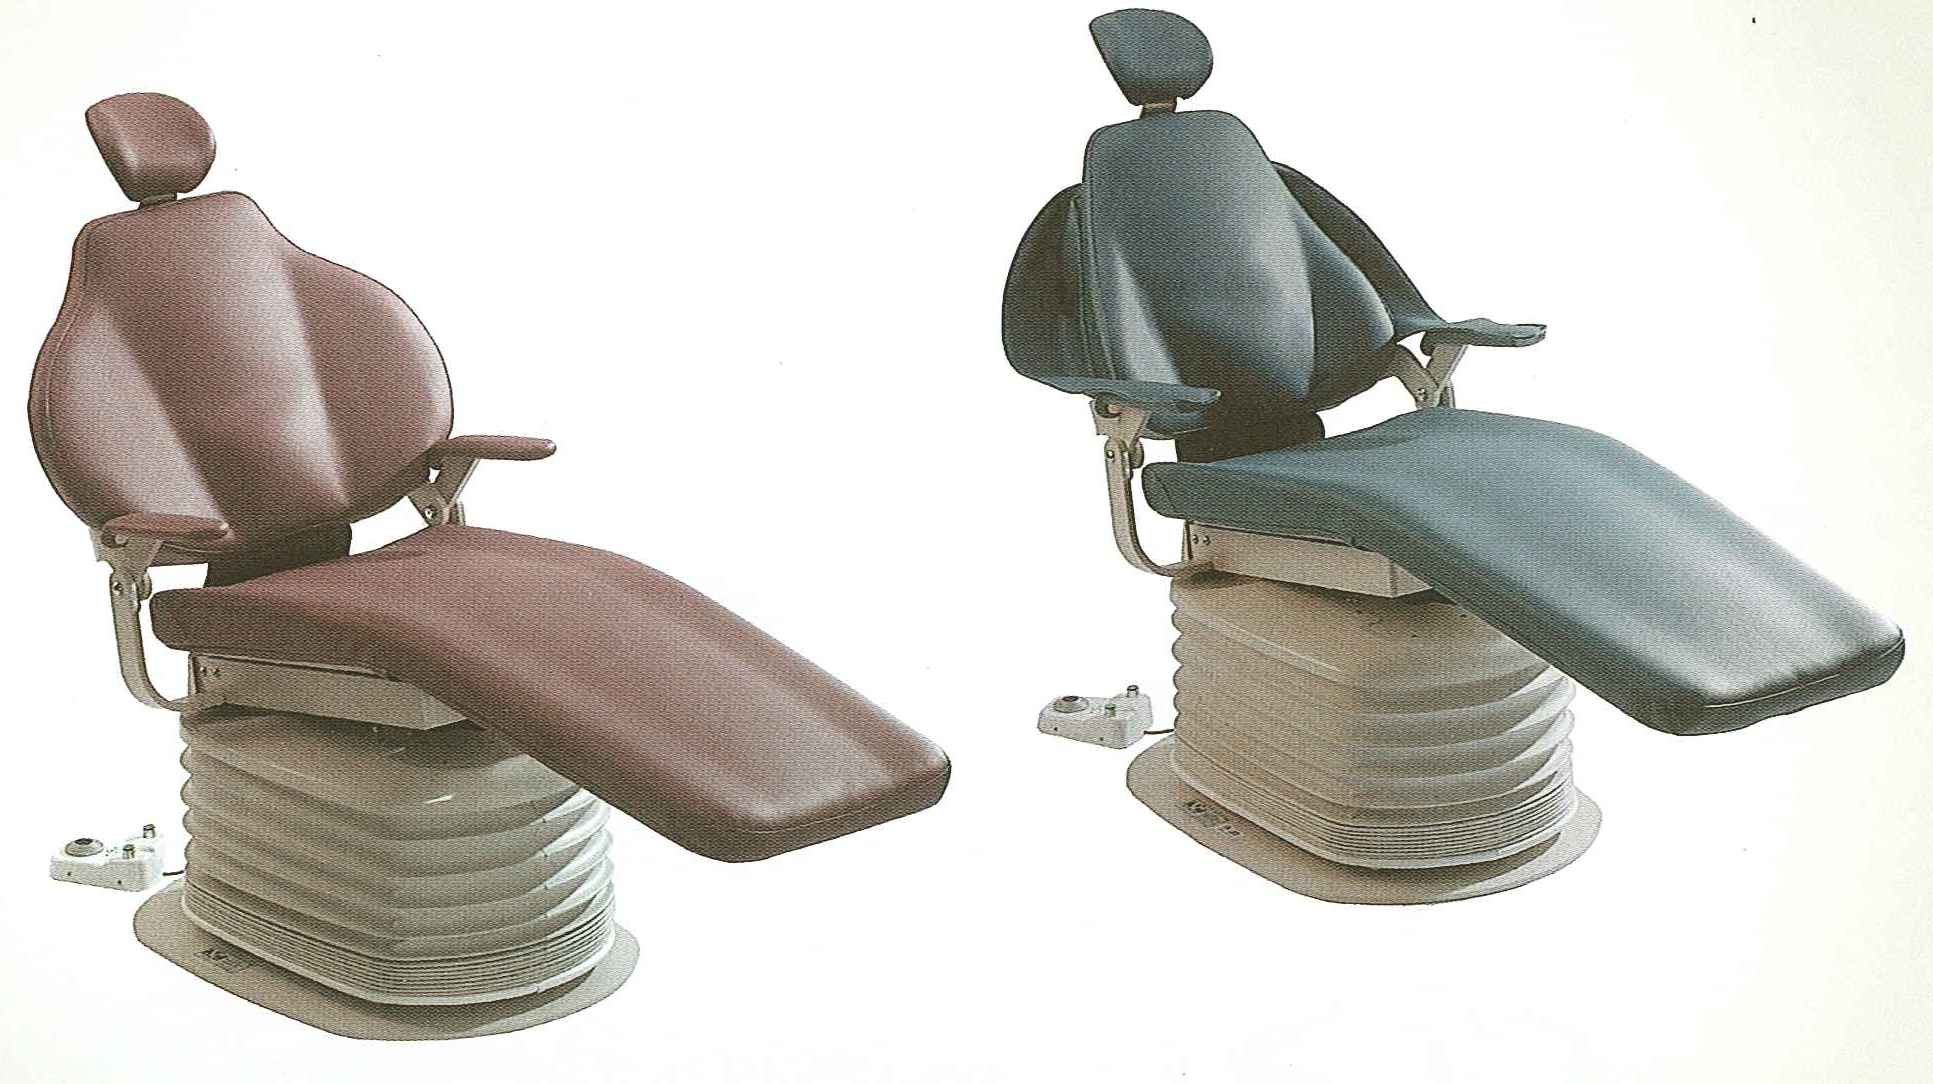 Evolution 3 Dental Chair by Beaver State